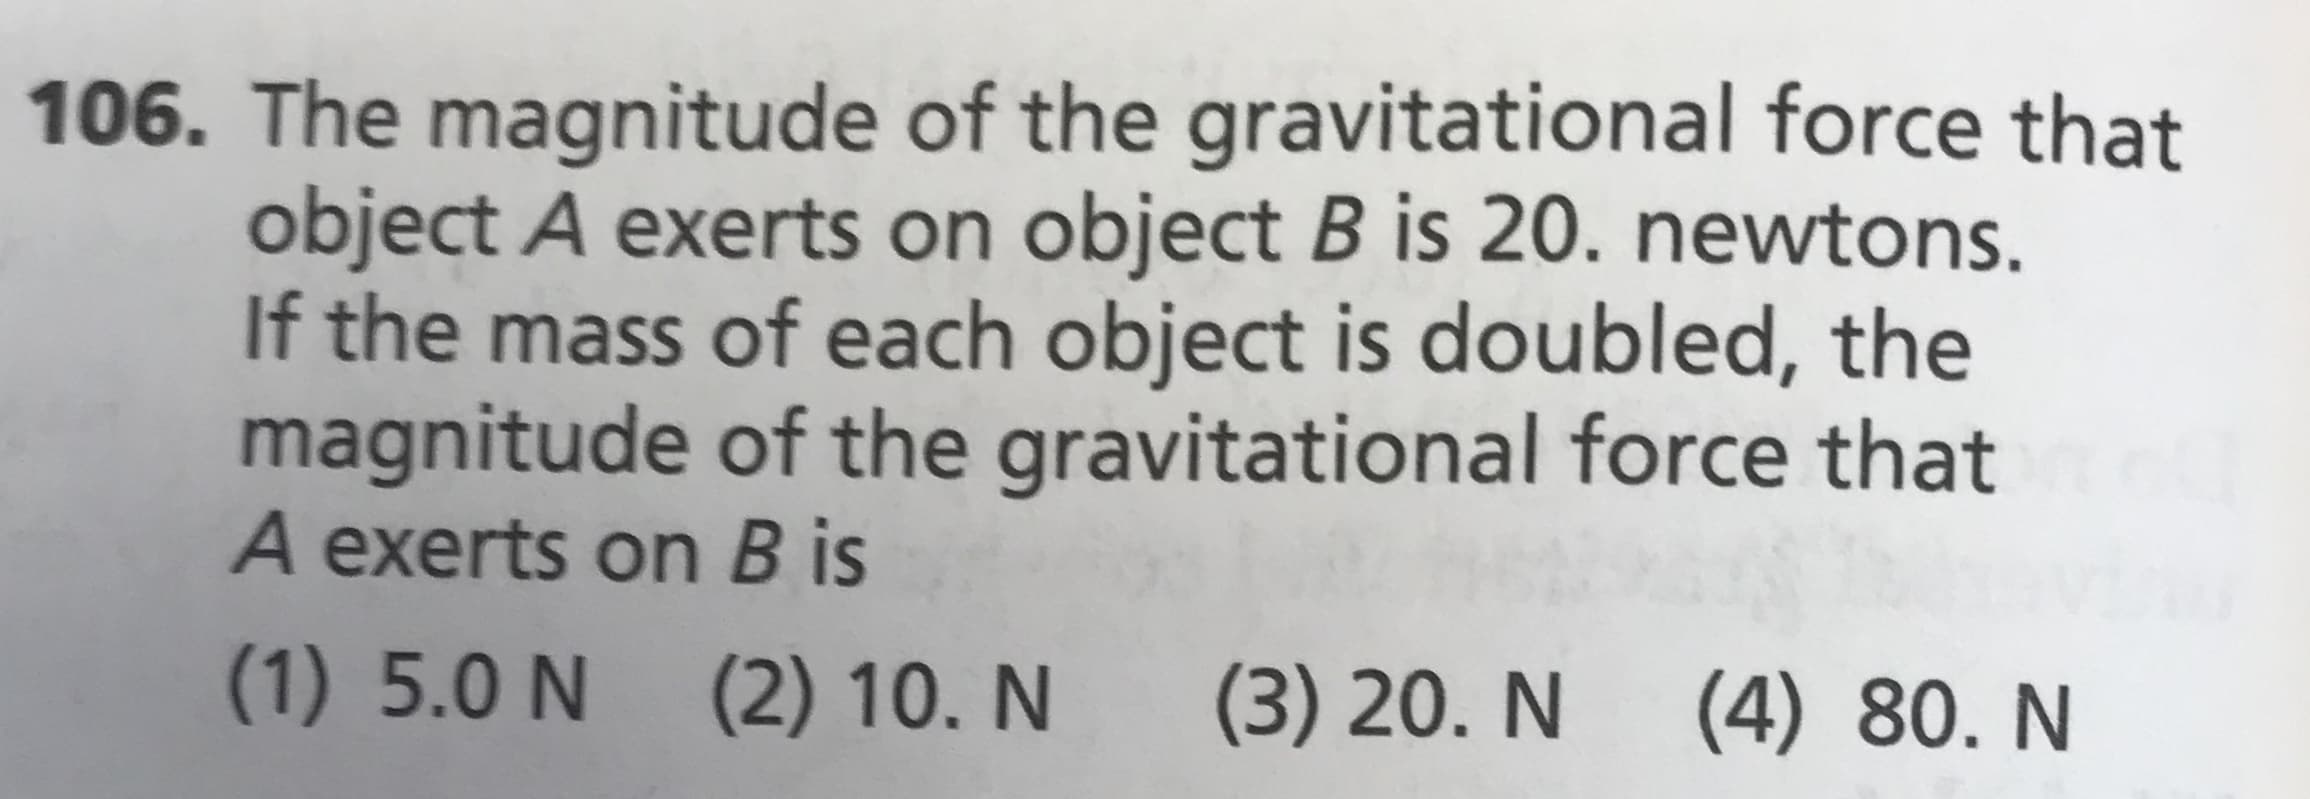 106. The magnitude of the gravitational force that
object A exerts on object B is 20. newtons
If the mass of each object is doubled, the
magnitude of the gravitational force that
A exerts on B is
(1) 5.0 N
(2) 10. N
(3) 20. N
(4) 80. N
